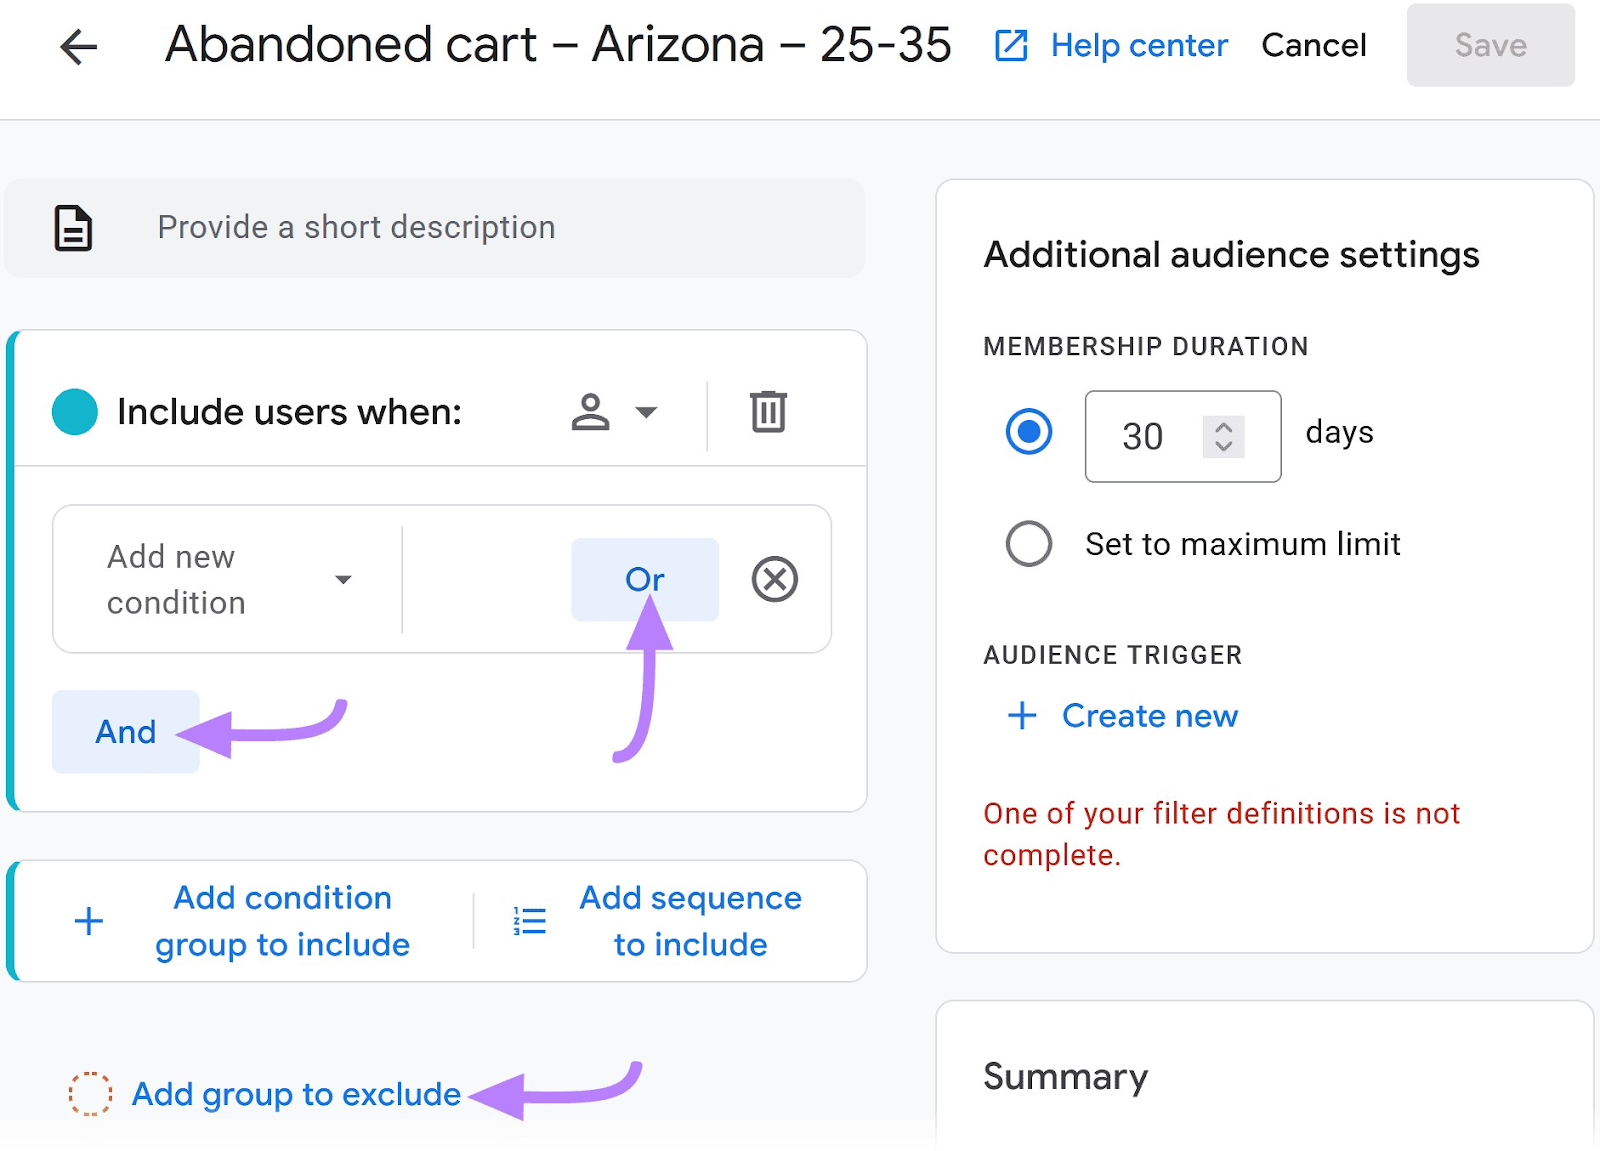 Audience editor page for "Abandoned cart - Arizona - 25-35"